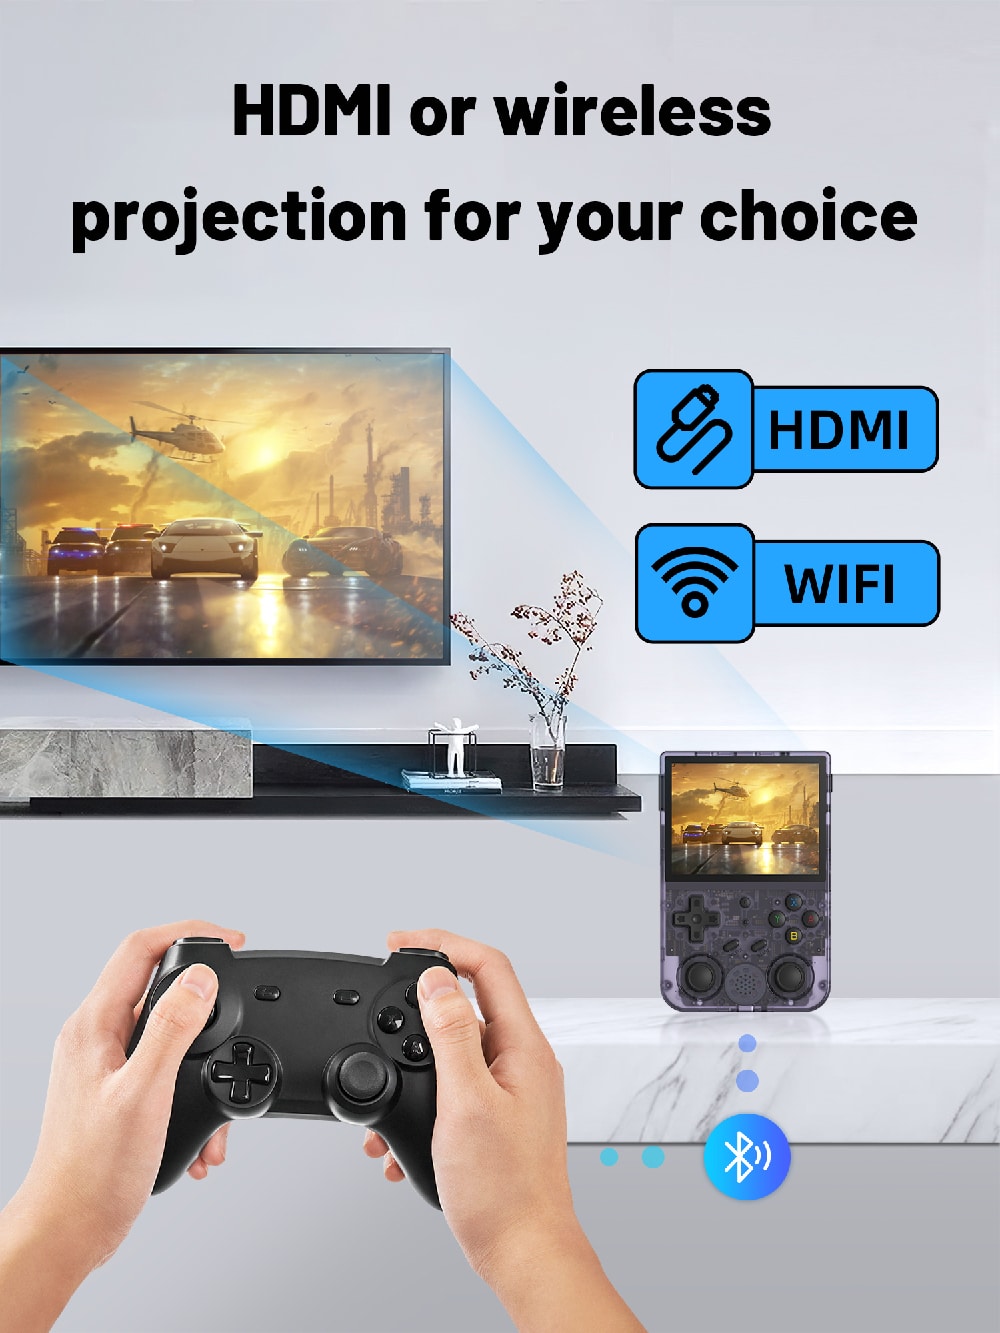 ANBERNIC RG353V HDMI or wireless projection 